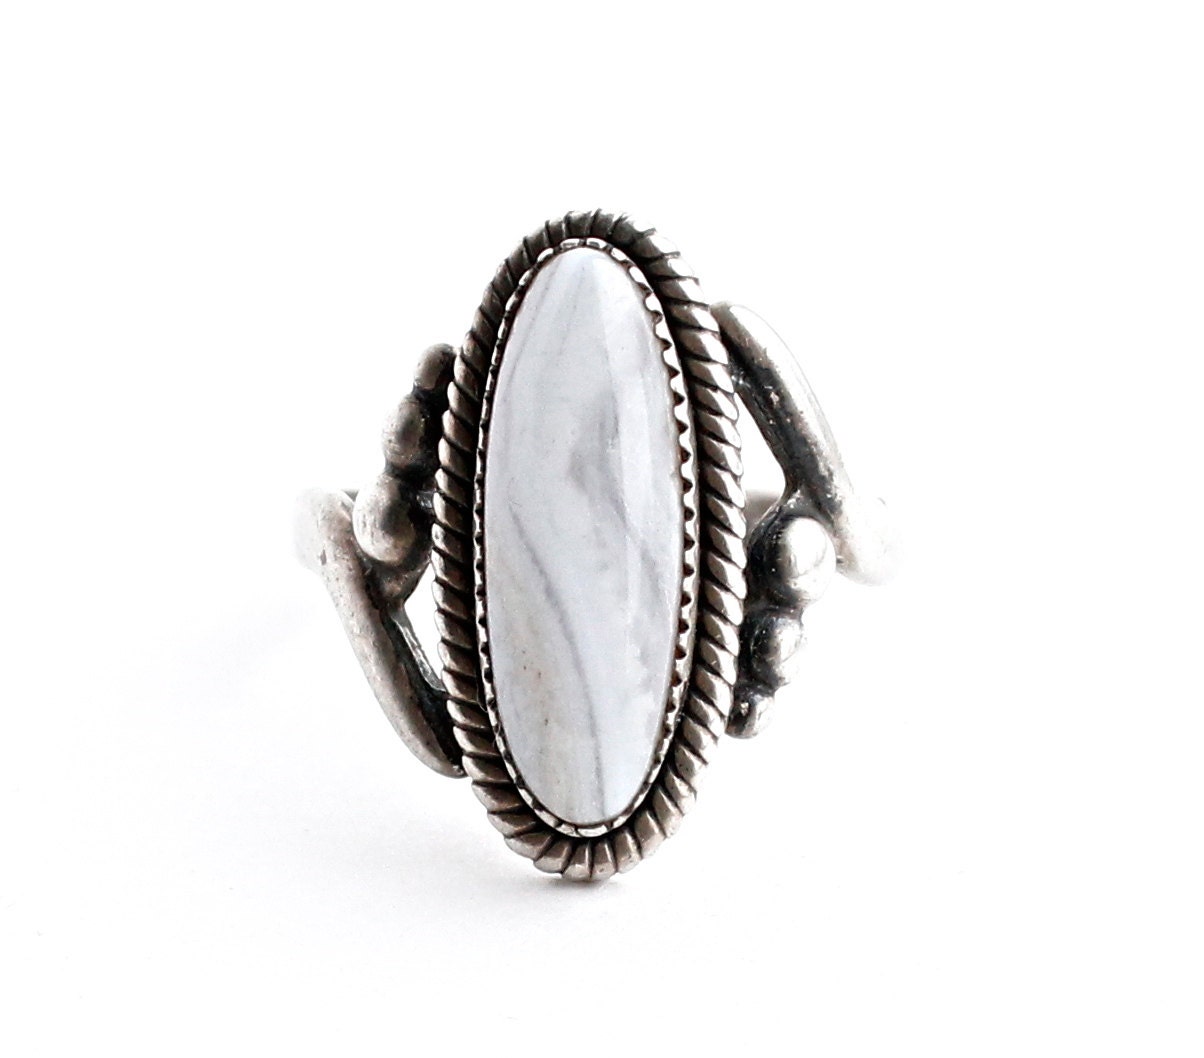 Vintage Sterling Silver White Stone Ring Size 7 by MaejeanVintage